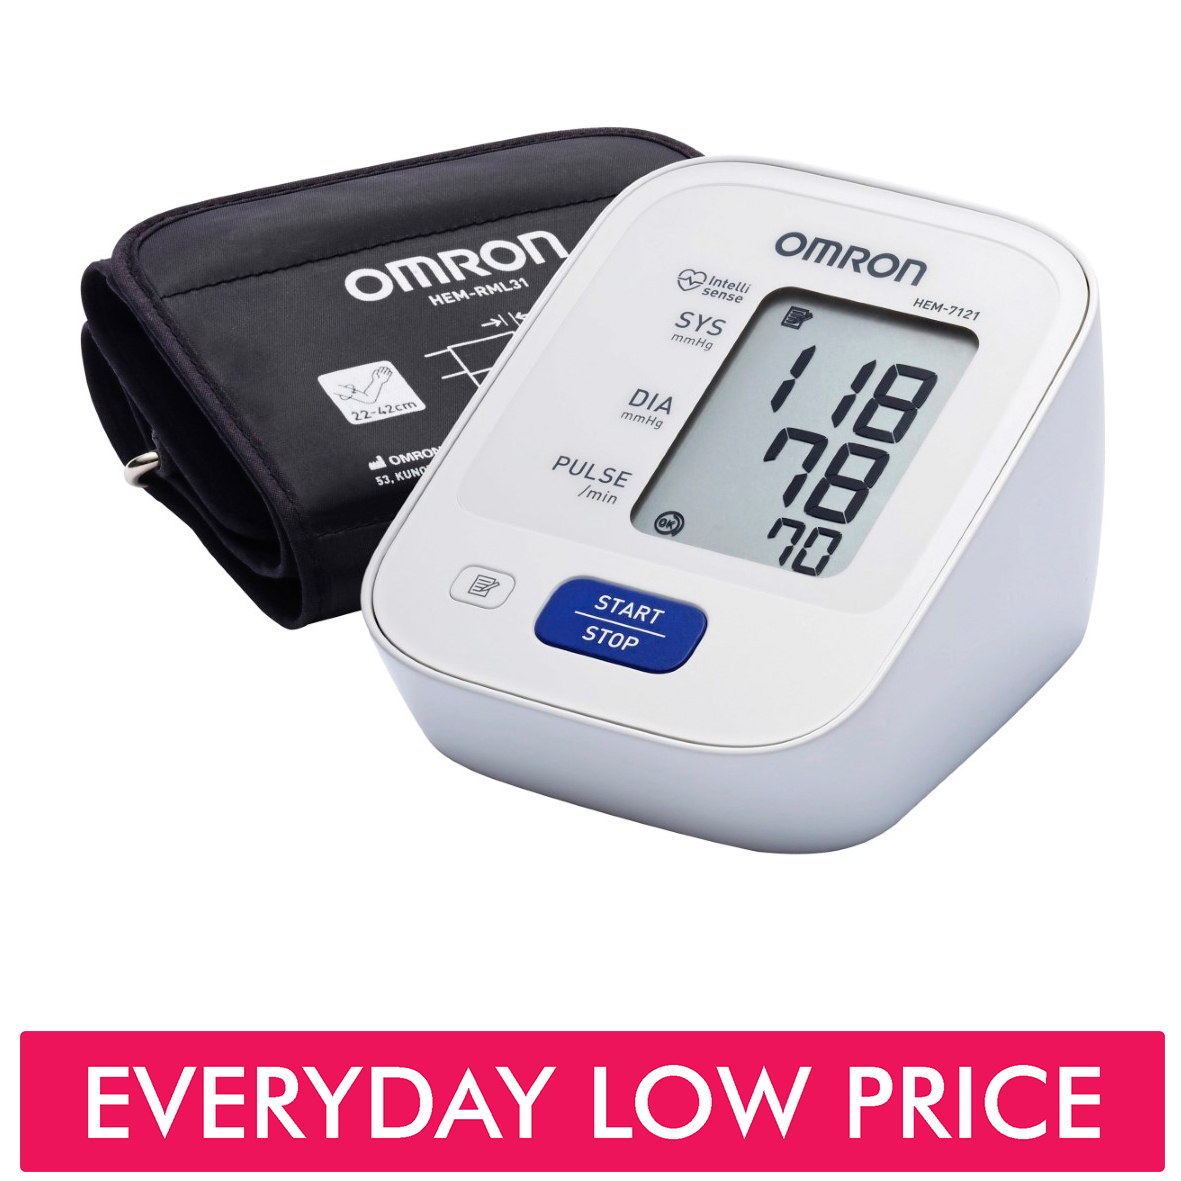 how-to-use-the-omron-blood-pressure-monitor-clearance-discount-save-52